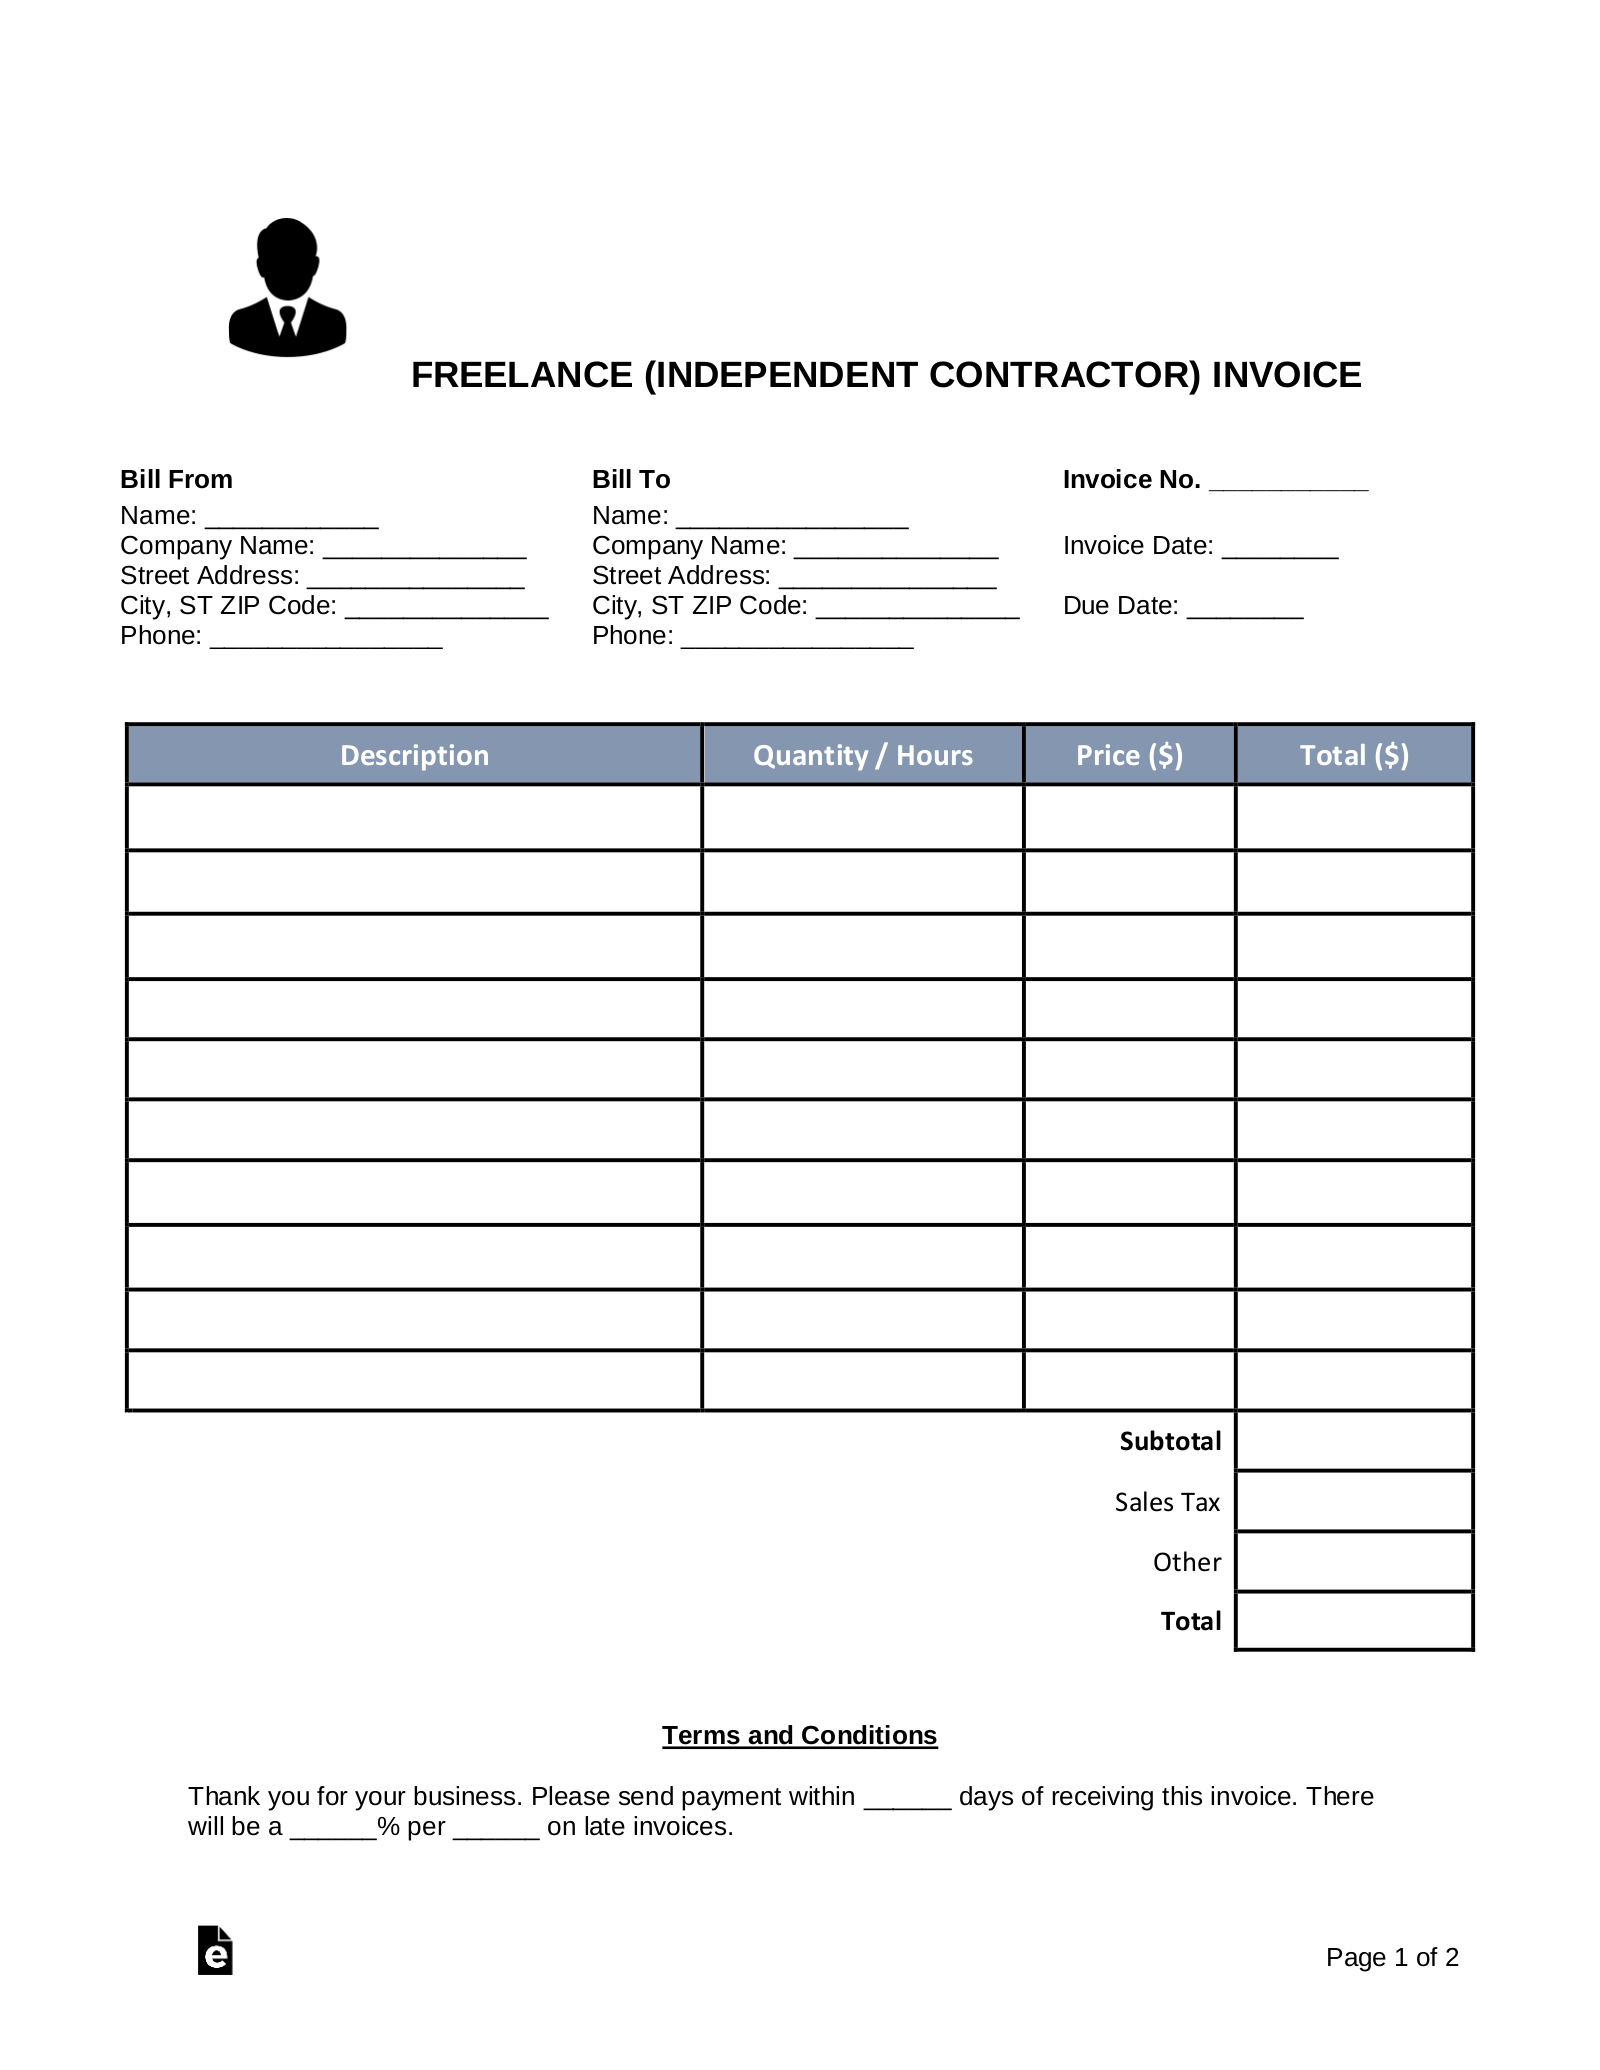 Freelance (Independent Contractor) Invoice Template